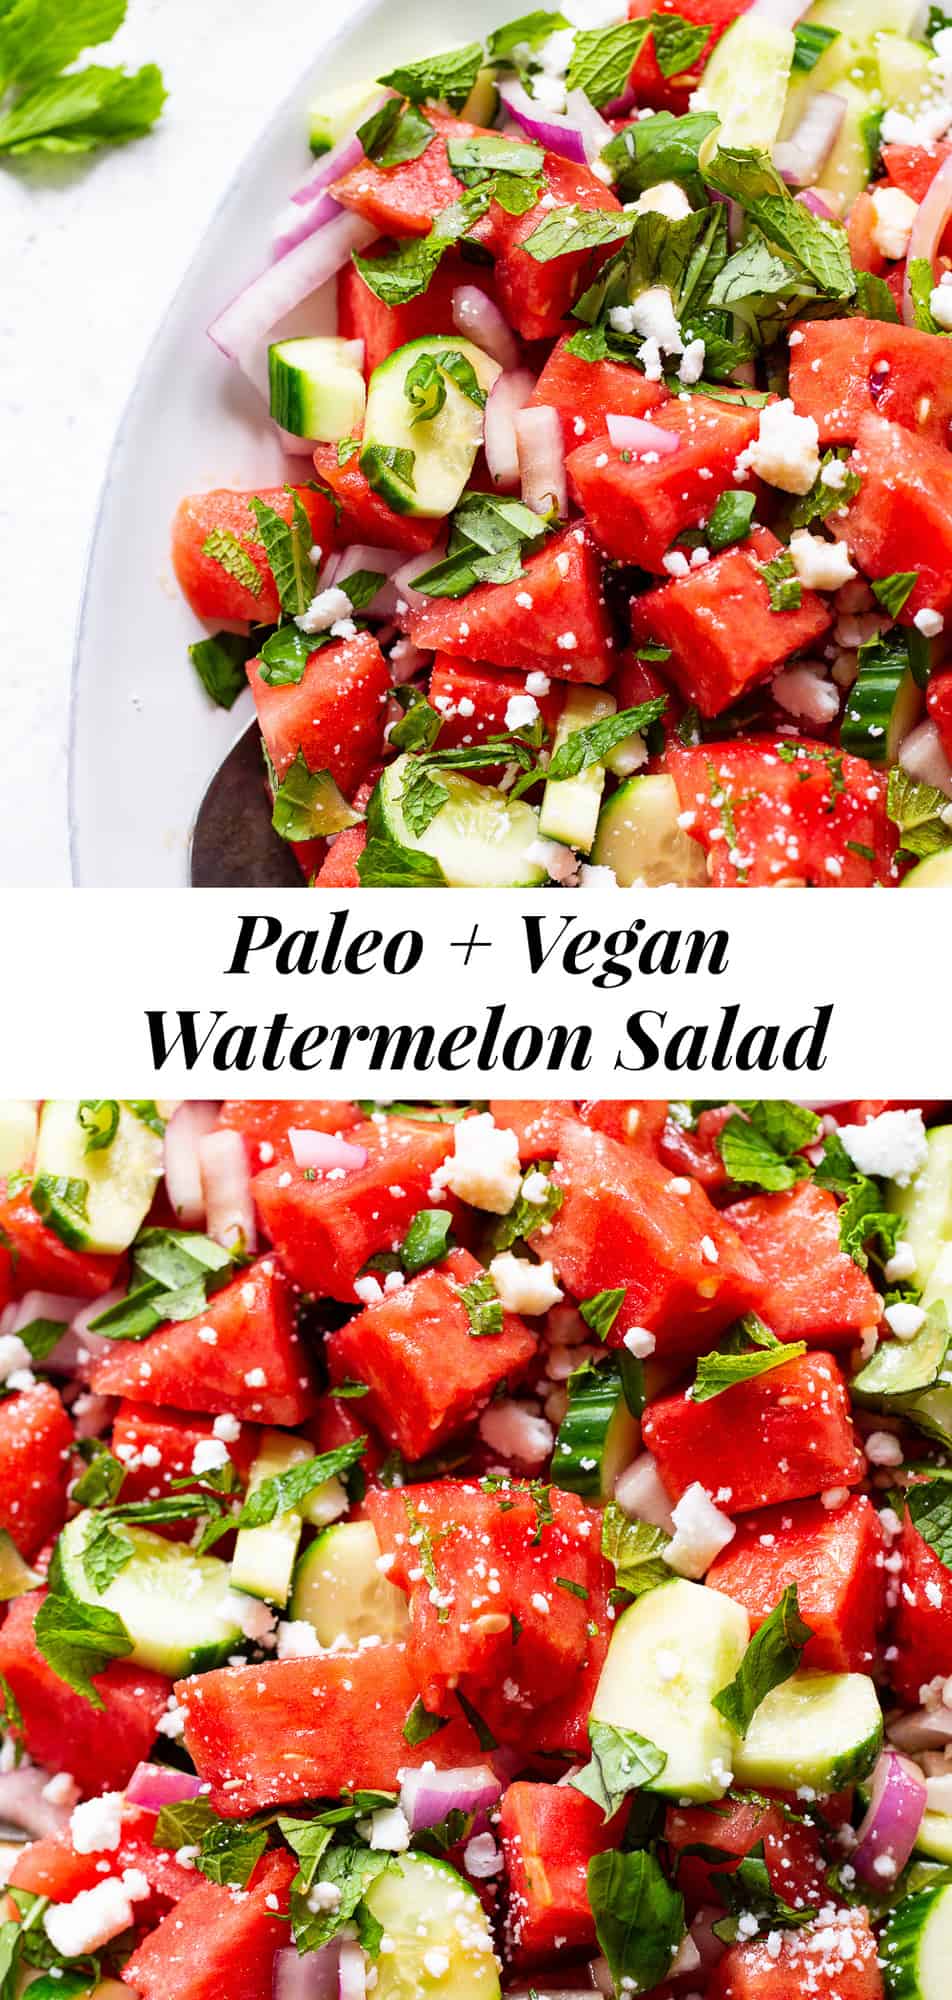 This simple and refreshing watermelon salad has all the flavors you’re craving!  Juicy watermelon with cucumber, red onion, basil, mint and dairy free feta cheese tossed in a super simple vinaigrette.  It’s healthy, paleo, vegan, and perfect for hot summer BBQs and picnics! #paleo #vegan #cleaneating